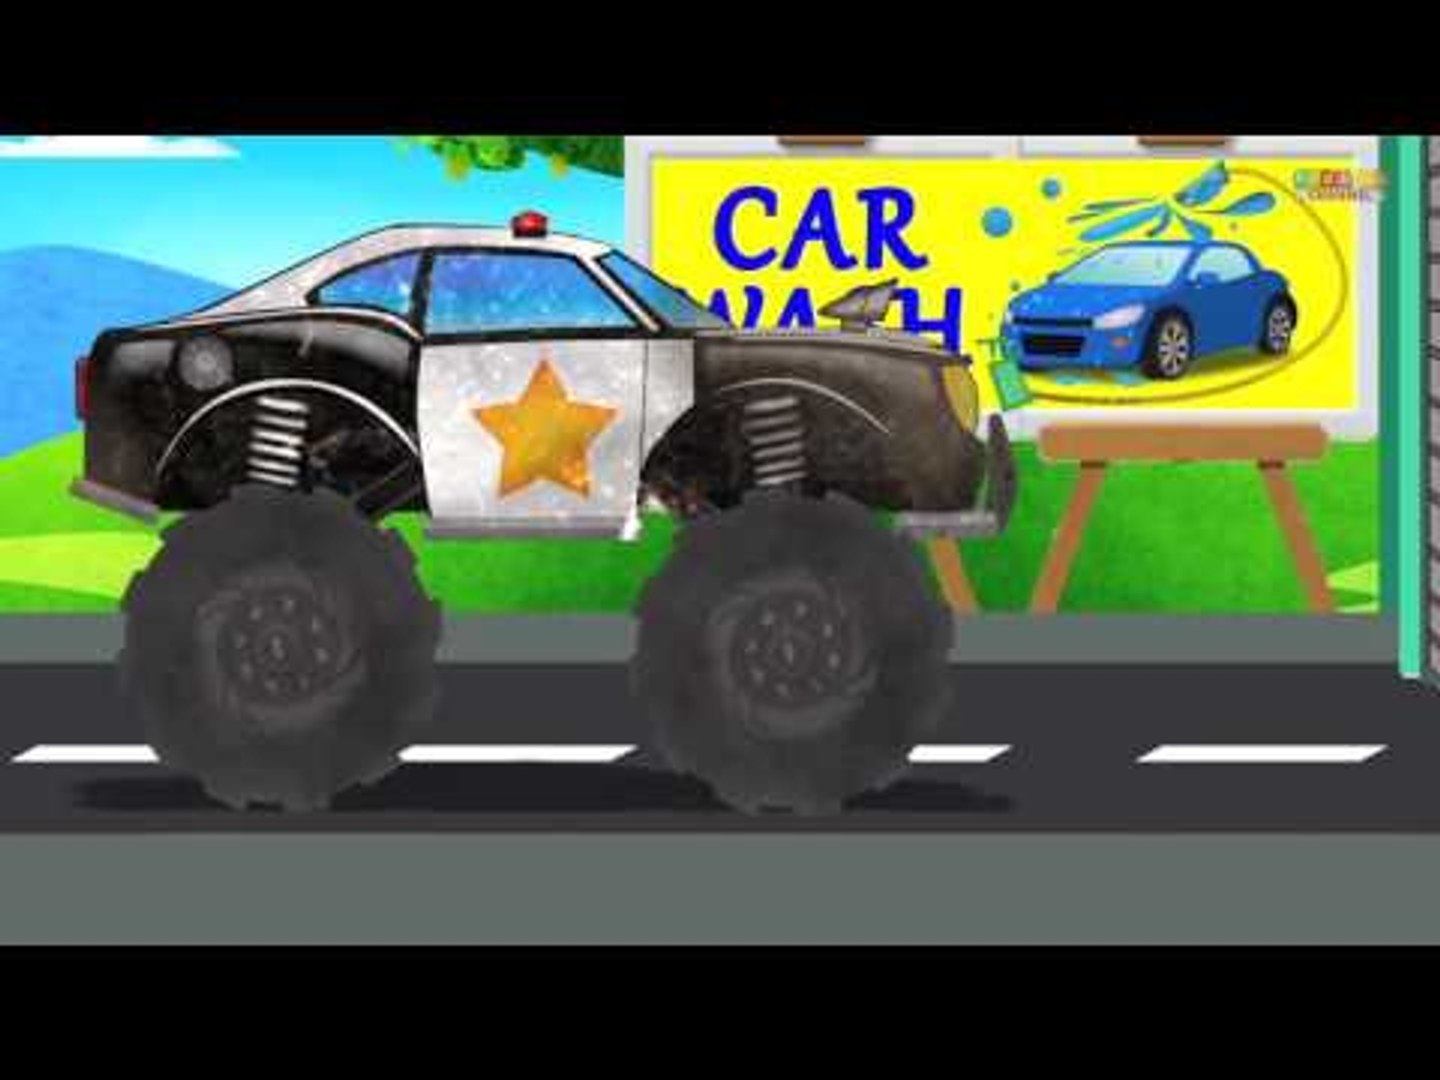 Police Monster Truck  Car Wash Video for Kids & Toddlers - video